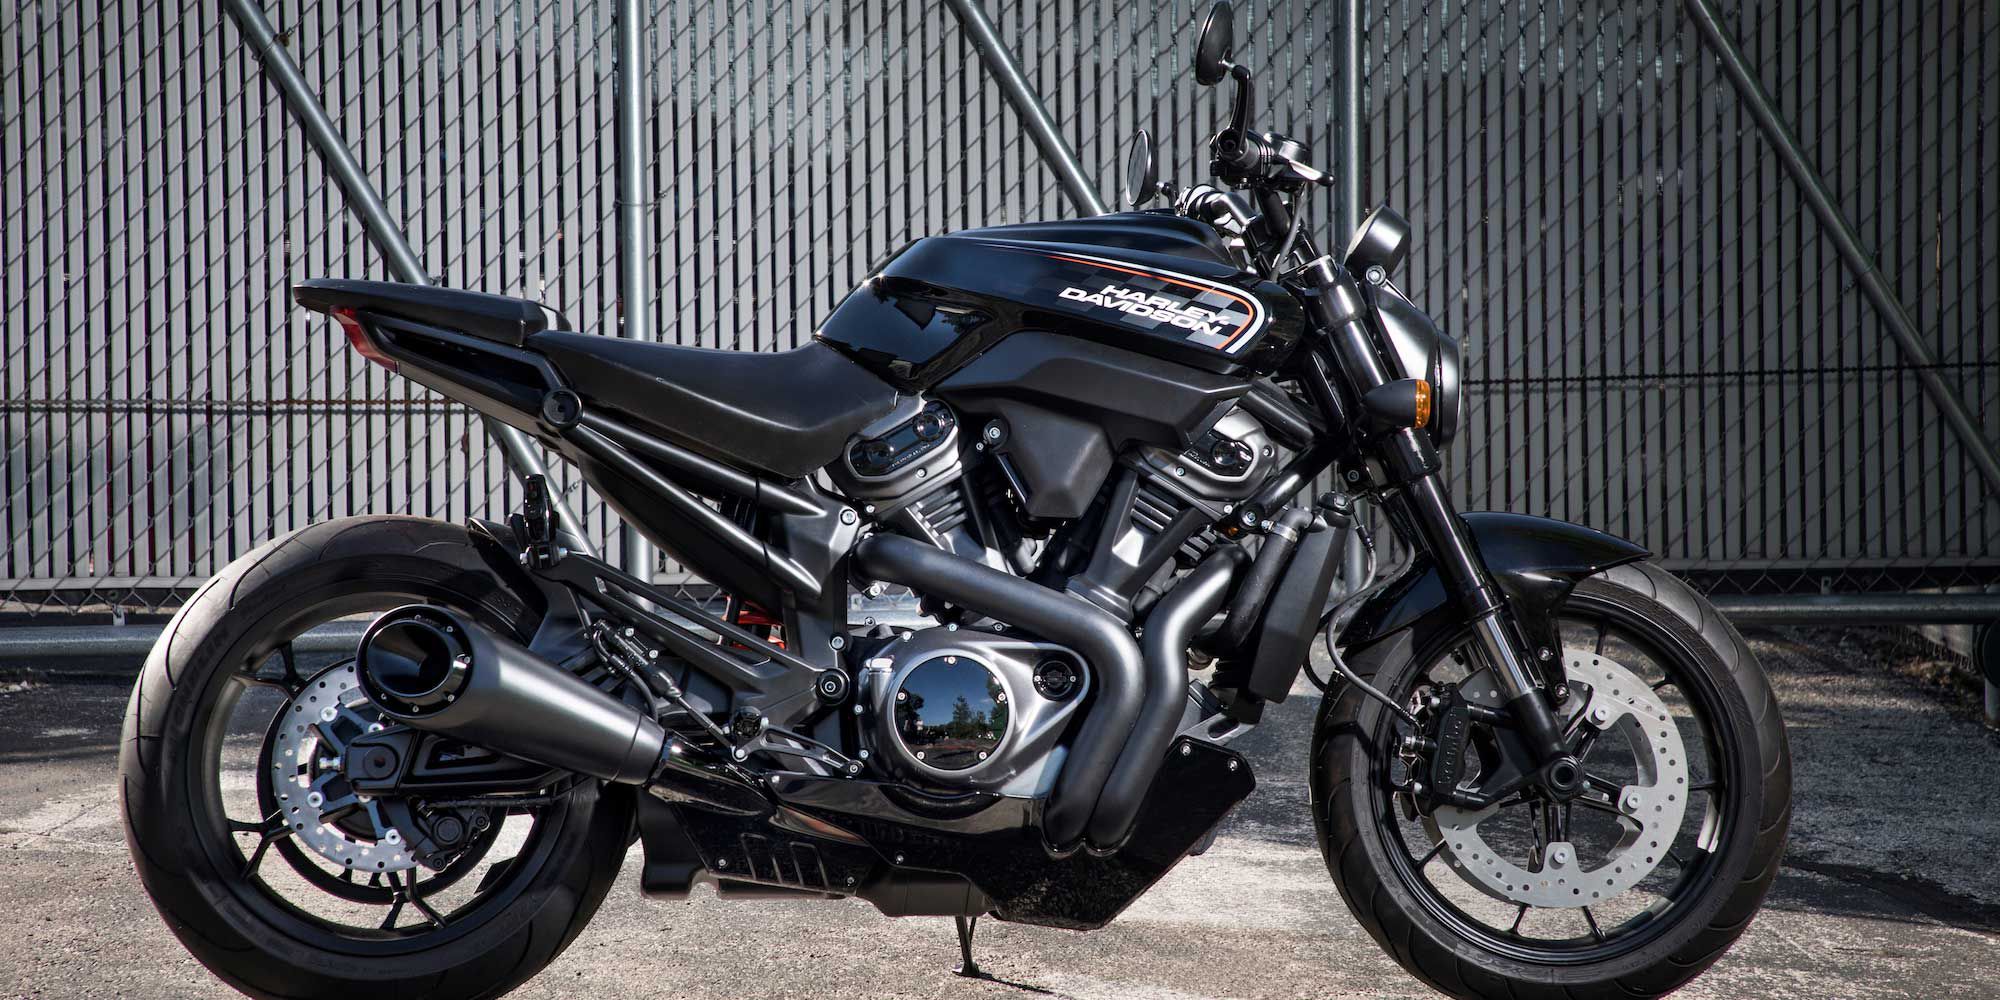 2020 Harley Davidson Streetfighter Preview Motorcyclist